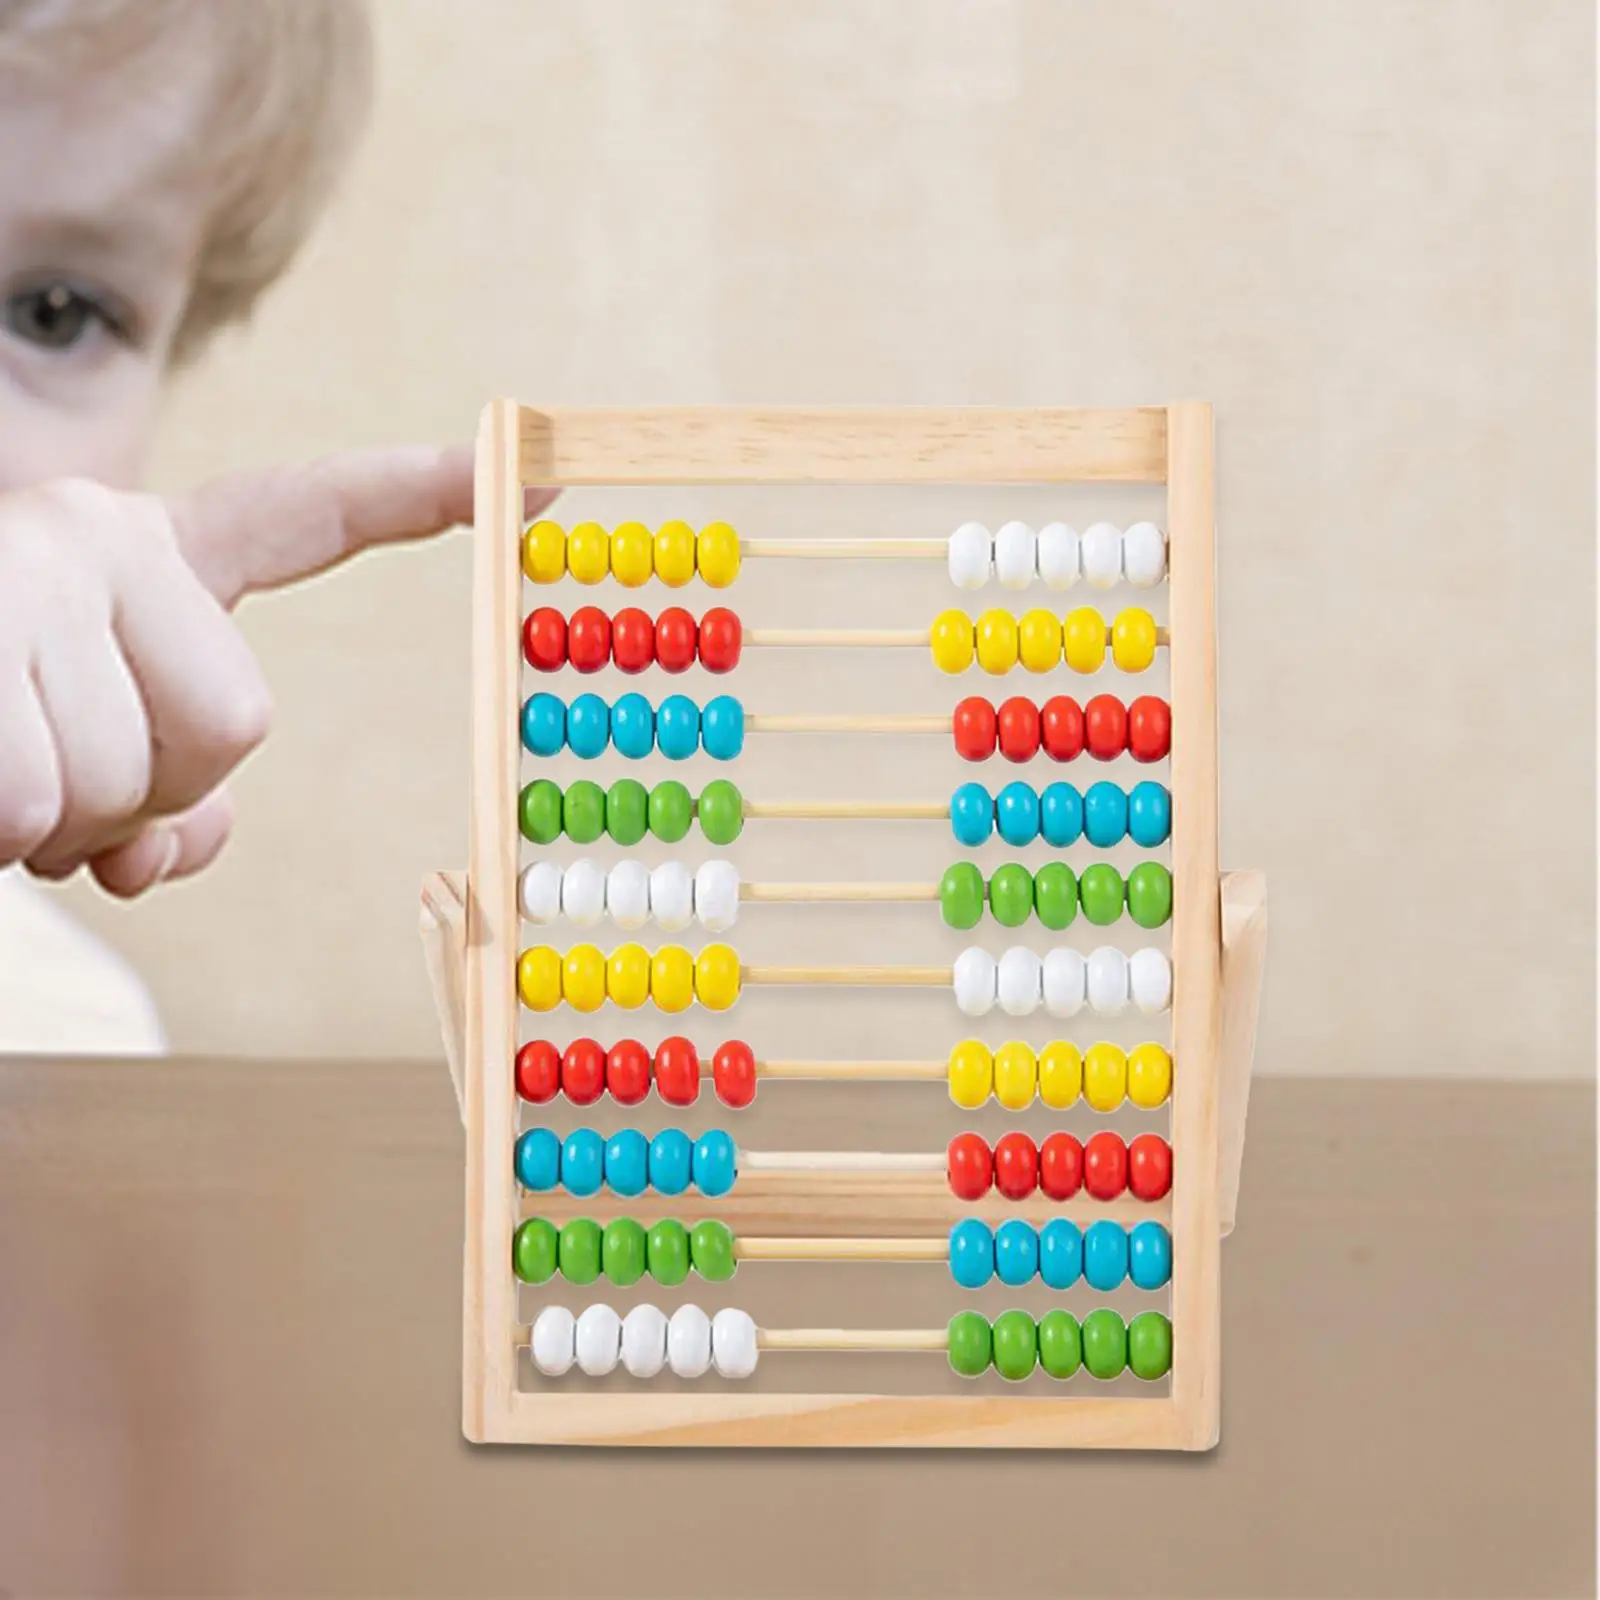 Wooden Abacus Educational Counting Frames Toy 100 Beads Math Learning Math Counting Frame Educational Toy for Boys